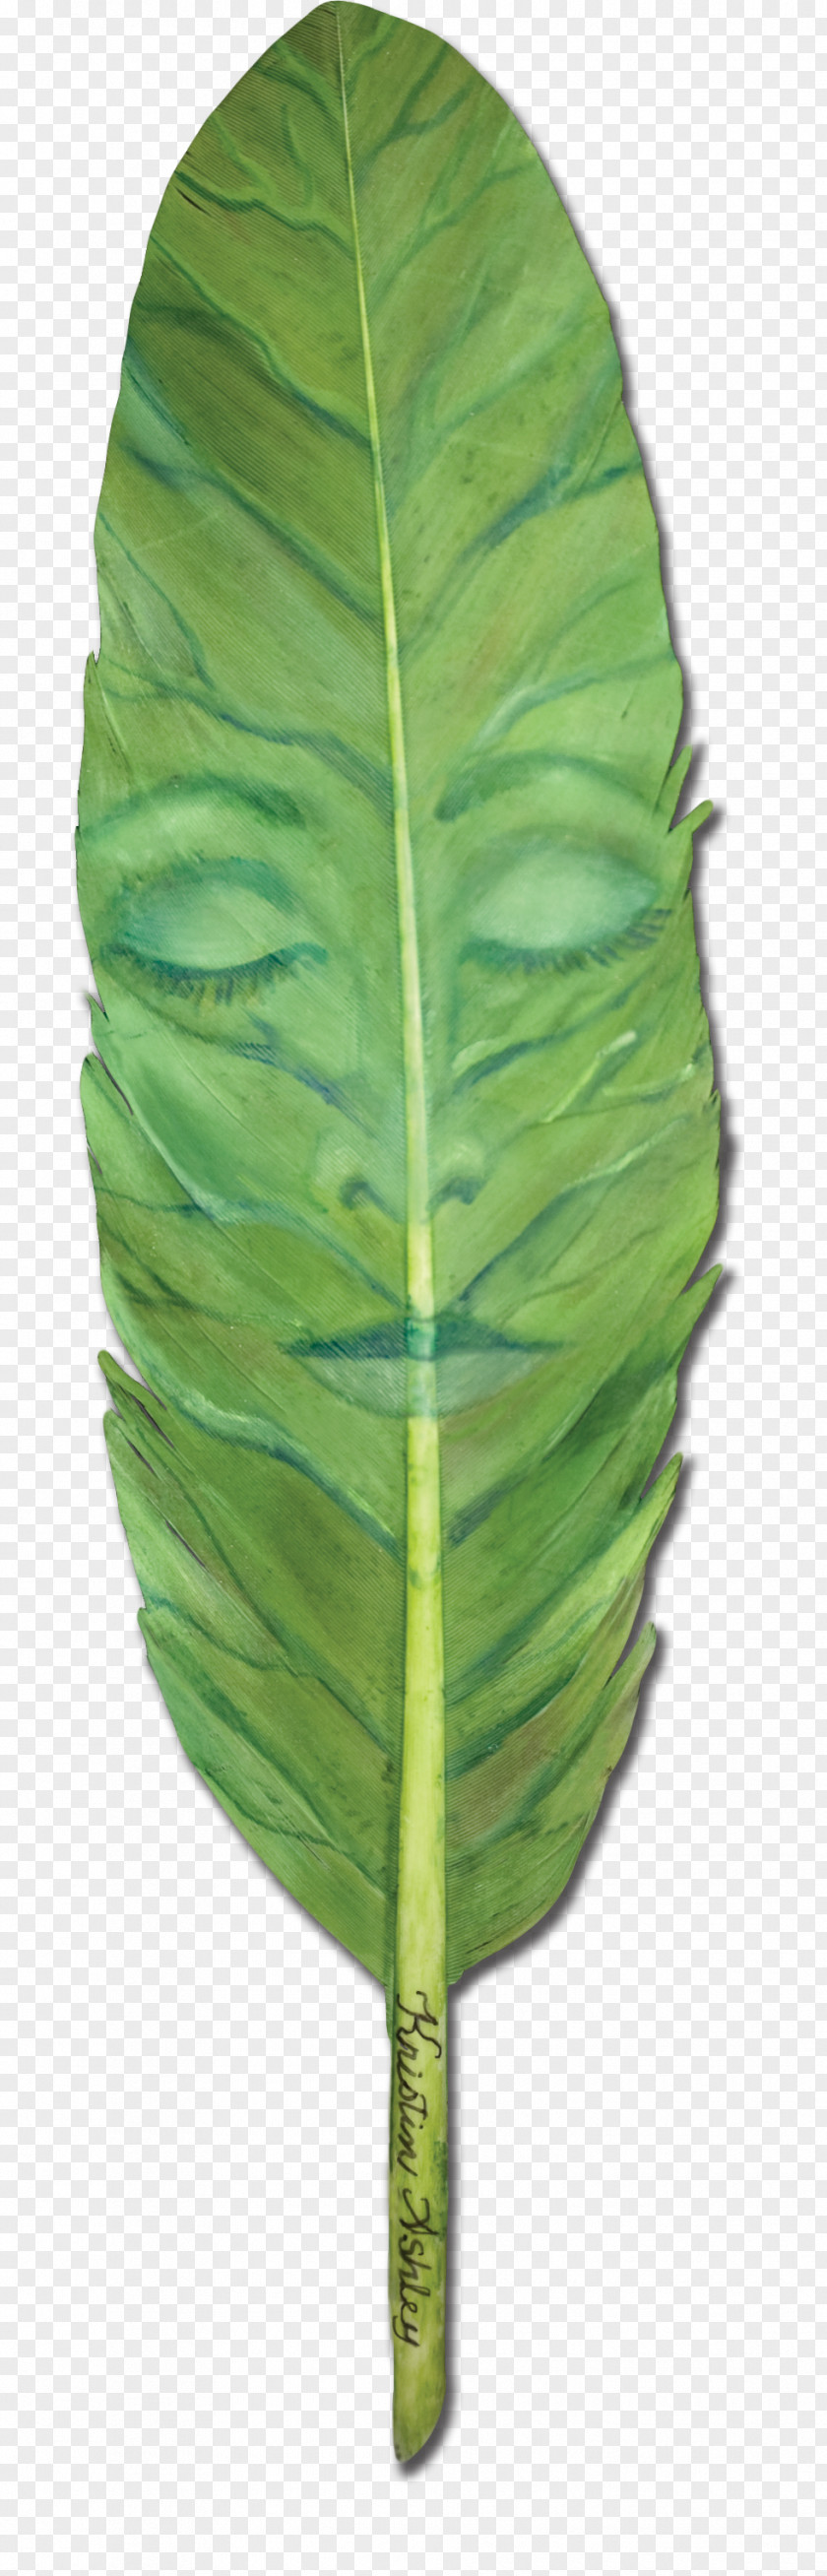 Leaf All Rights Reserved Email Plant Stem PNG